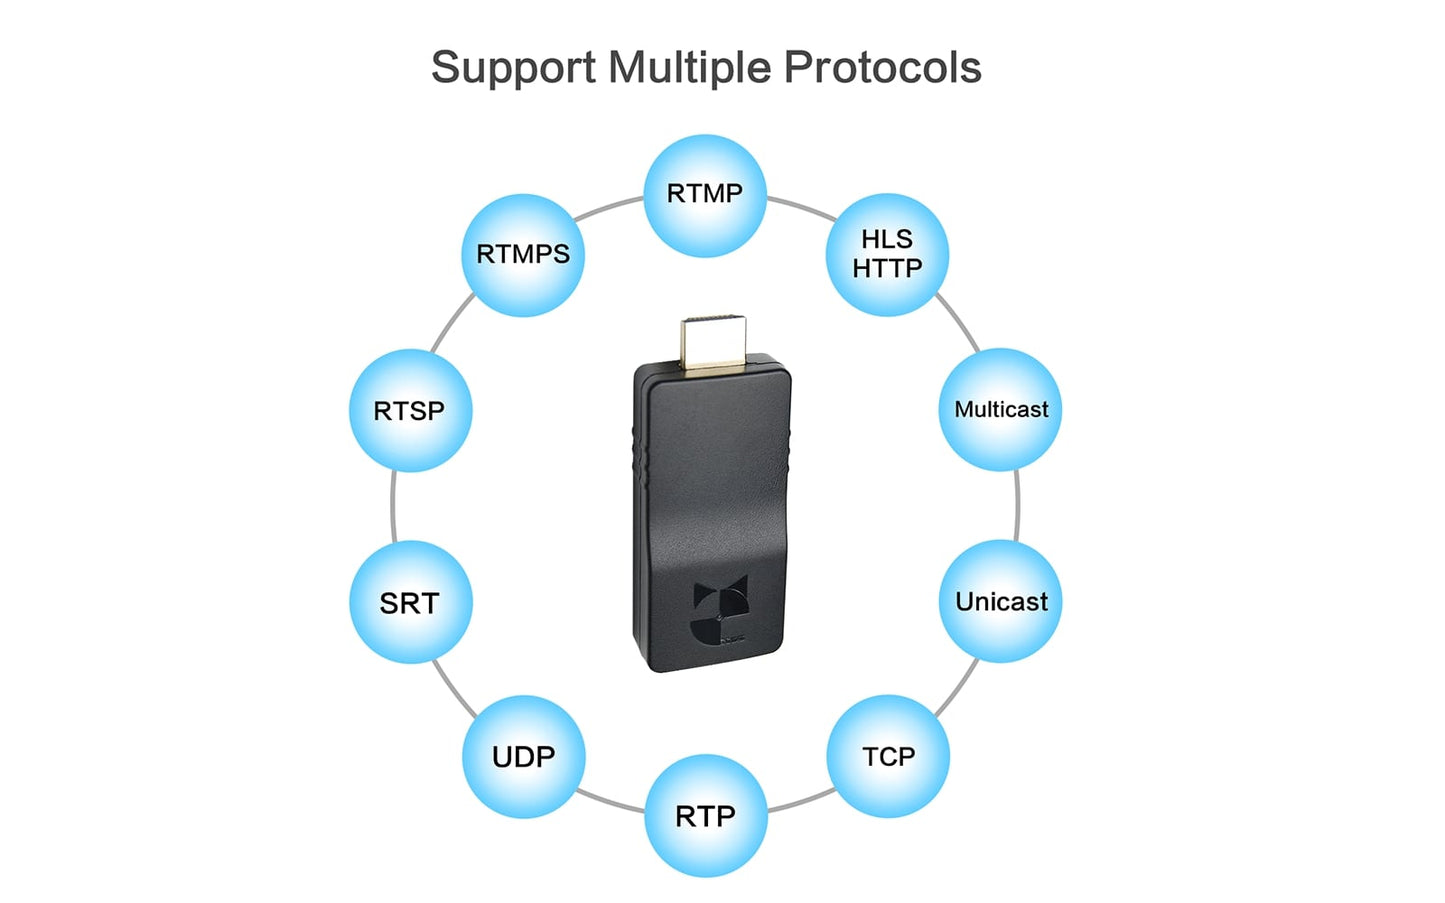 wireless ip streaming encoder-support multiple protocols